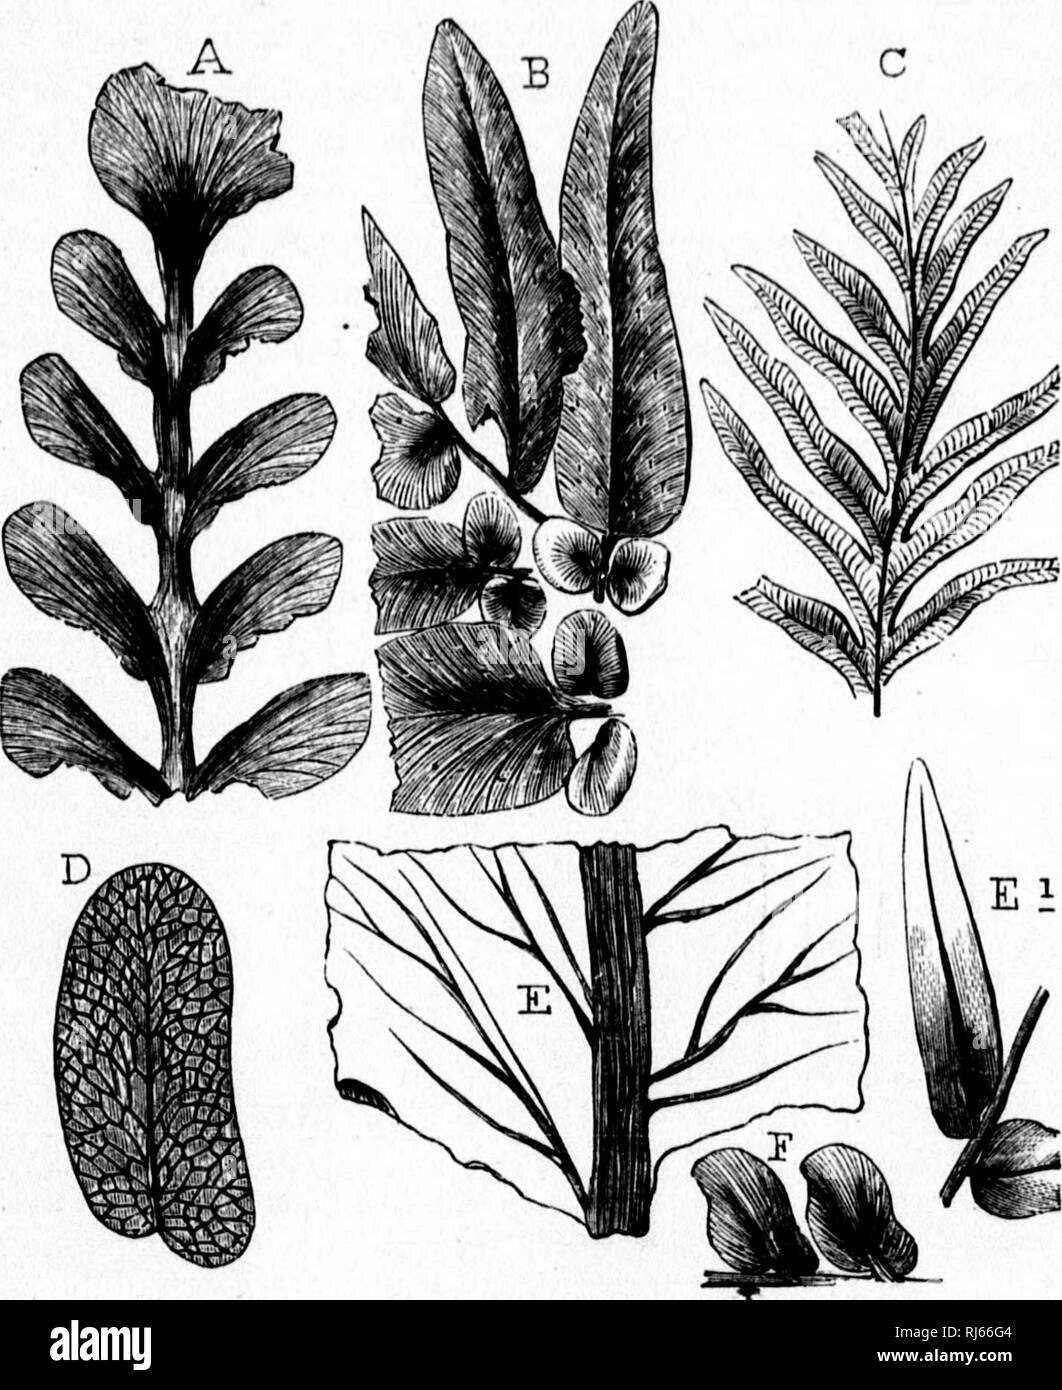 . The geological history of plants [microform]. Paleobotany; Paléobotanique. 1; i! I |i i II 12G TUE GEOLOGICAL HISTORY OF PLANTS. of fossil ferns, in wliich the fructification is for the most part wanting, it is still more so, depending in great part on the form and venation of the divisions of the fronds.. Fio. 51.—Group of coal-formation ferns, a, Odontopteris suhcuneata (Bnu- bury). B, Neuropteria cordata (Brongniart). c, Alethopteris lonc/dtica (Brongrniart). d, Dicti/opteris obiiqud I Hunhury), e, Phyllopteris an- tiqua (Dawson), magnified; e&gt;, Natural size, f, H'europteris cyclopte-  Stock Photo